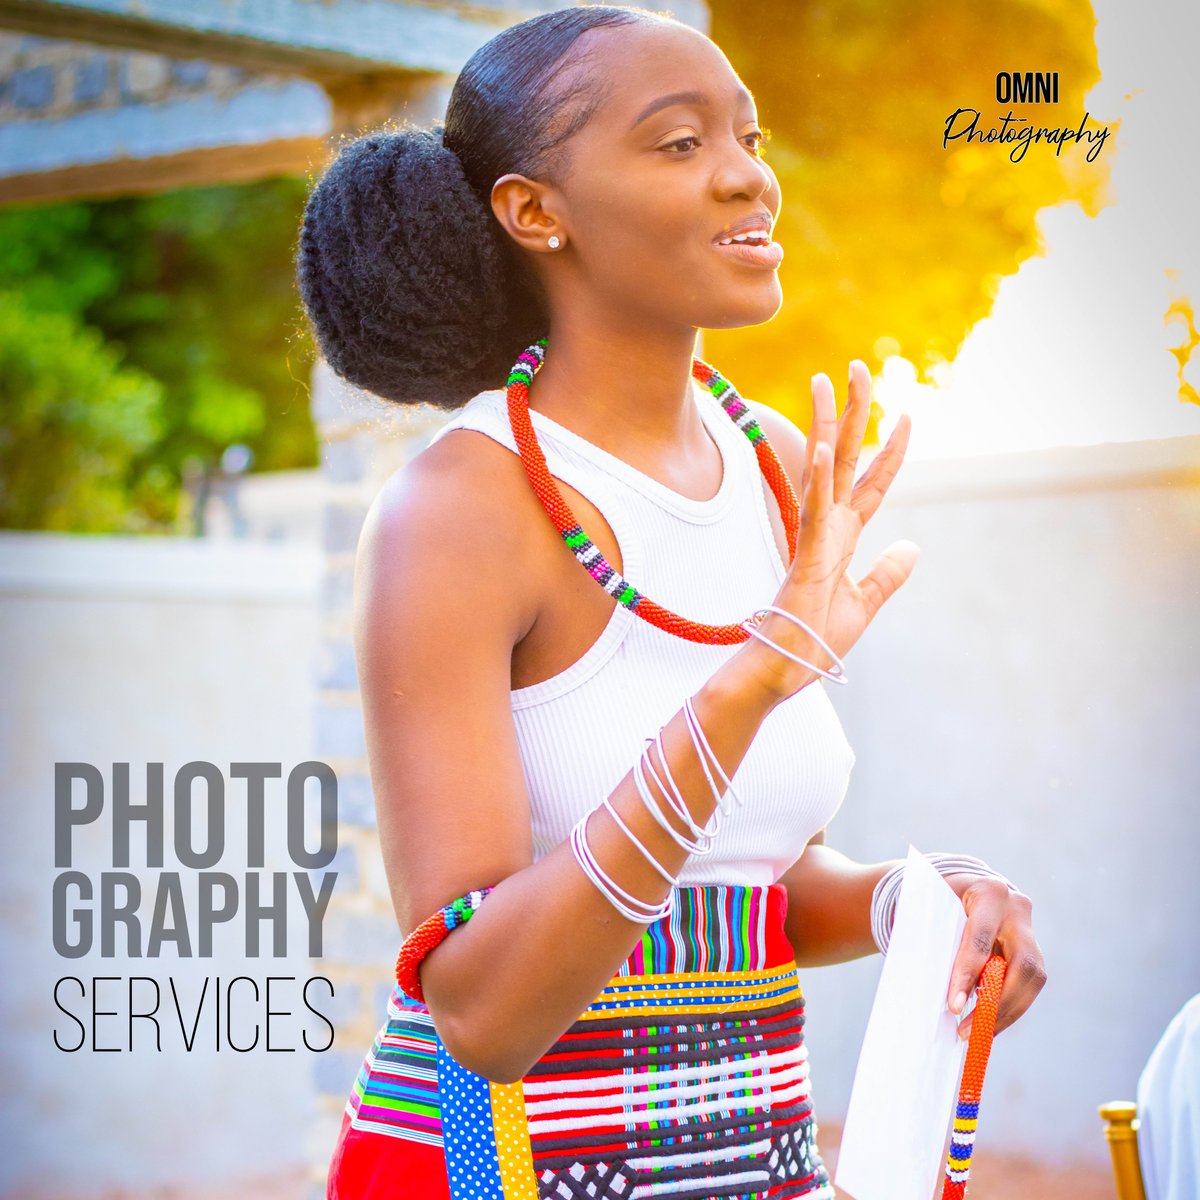 Let Omni Printings help you capture life's most beautiful moments. #photography #photooftheday #wednedsay #wcw #business #pretoria #southafrica #weddingphotography #photographer #picture #eventphotography #birthday #birthdayphotography #gauteng